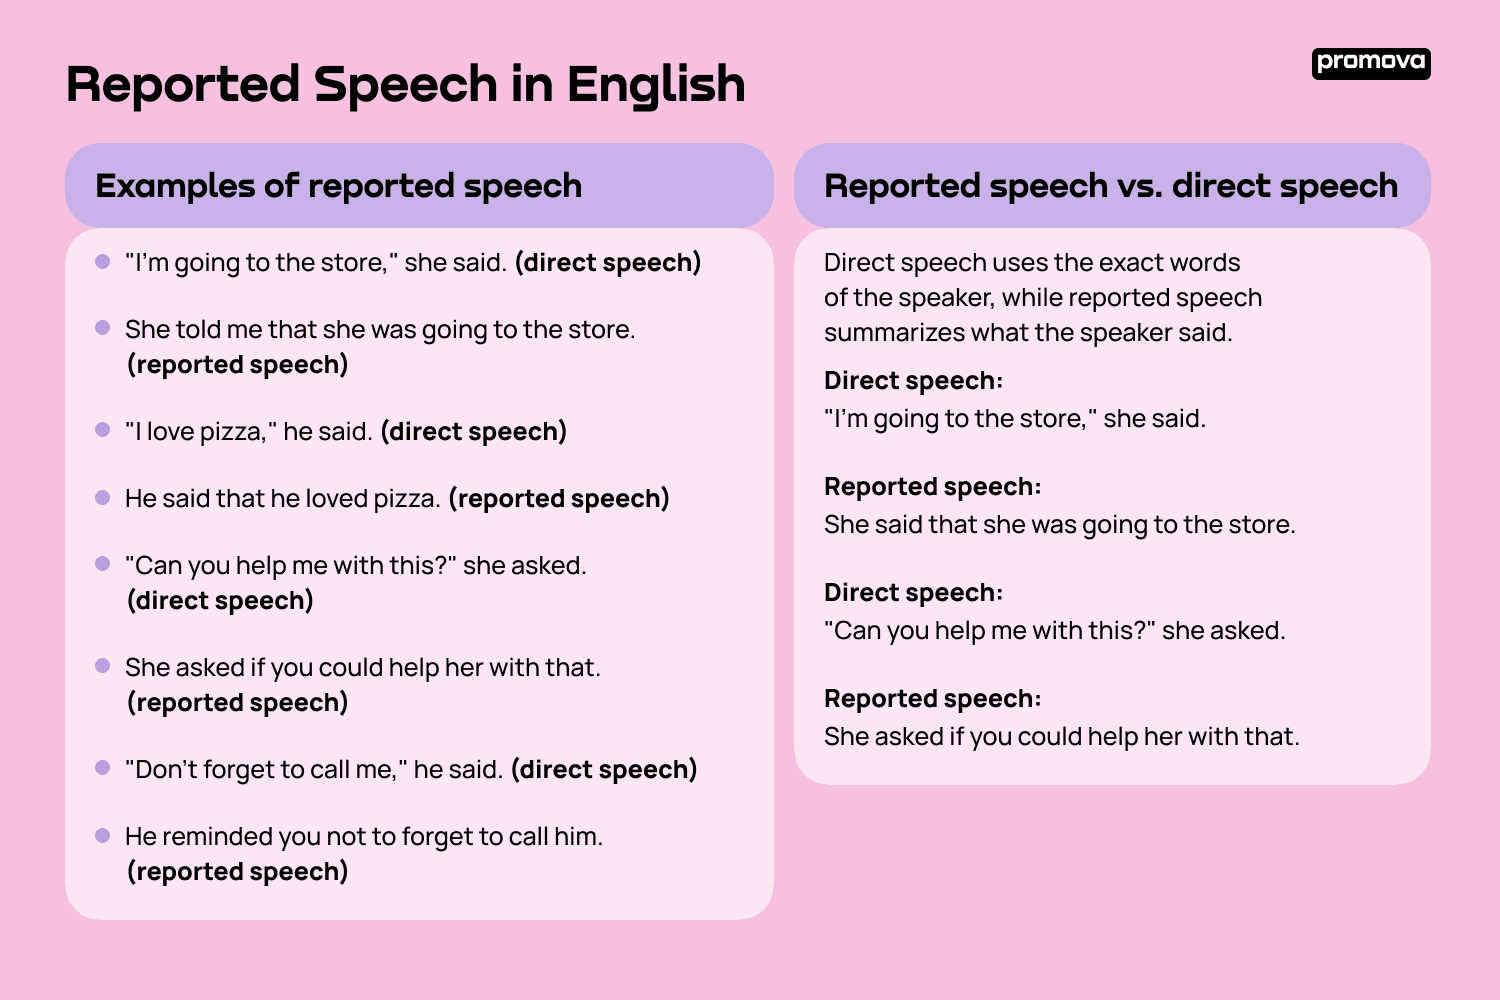 Examples of reported speech